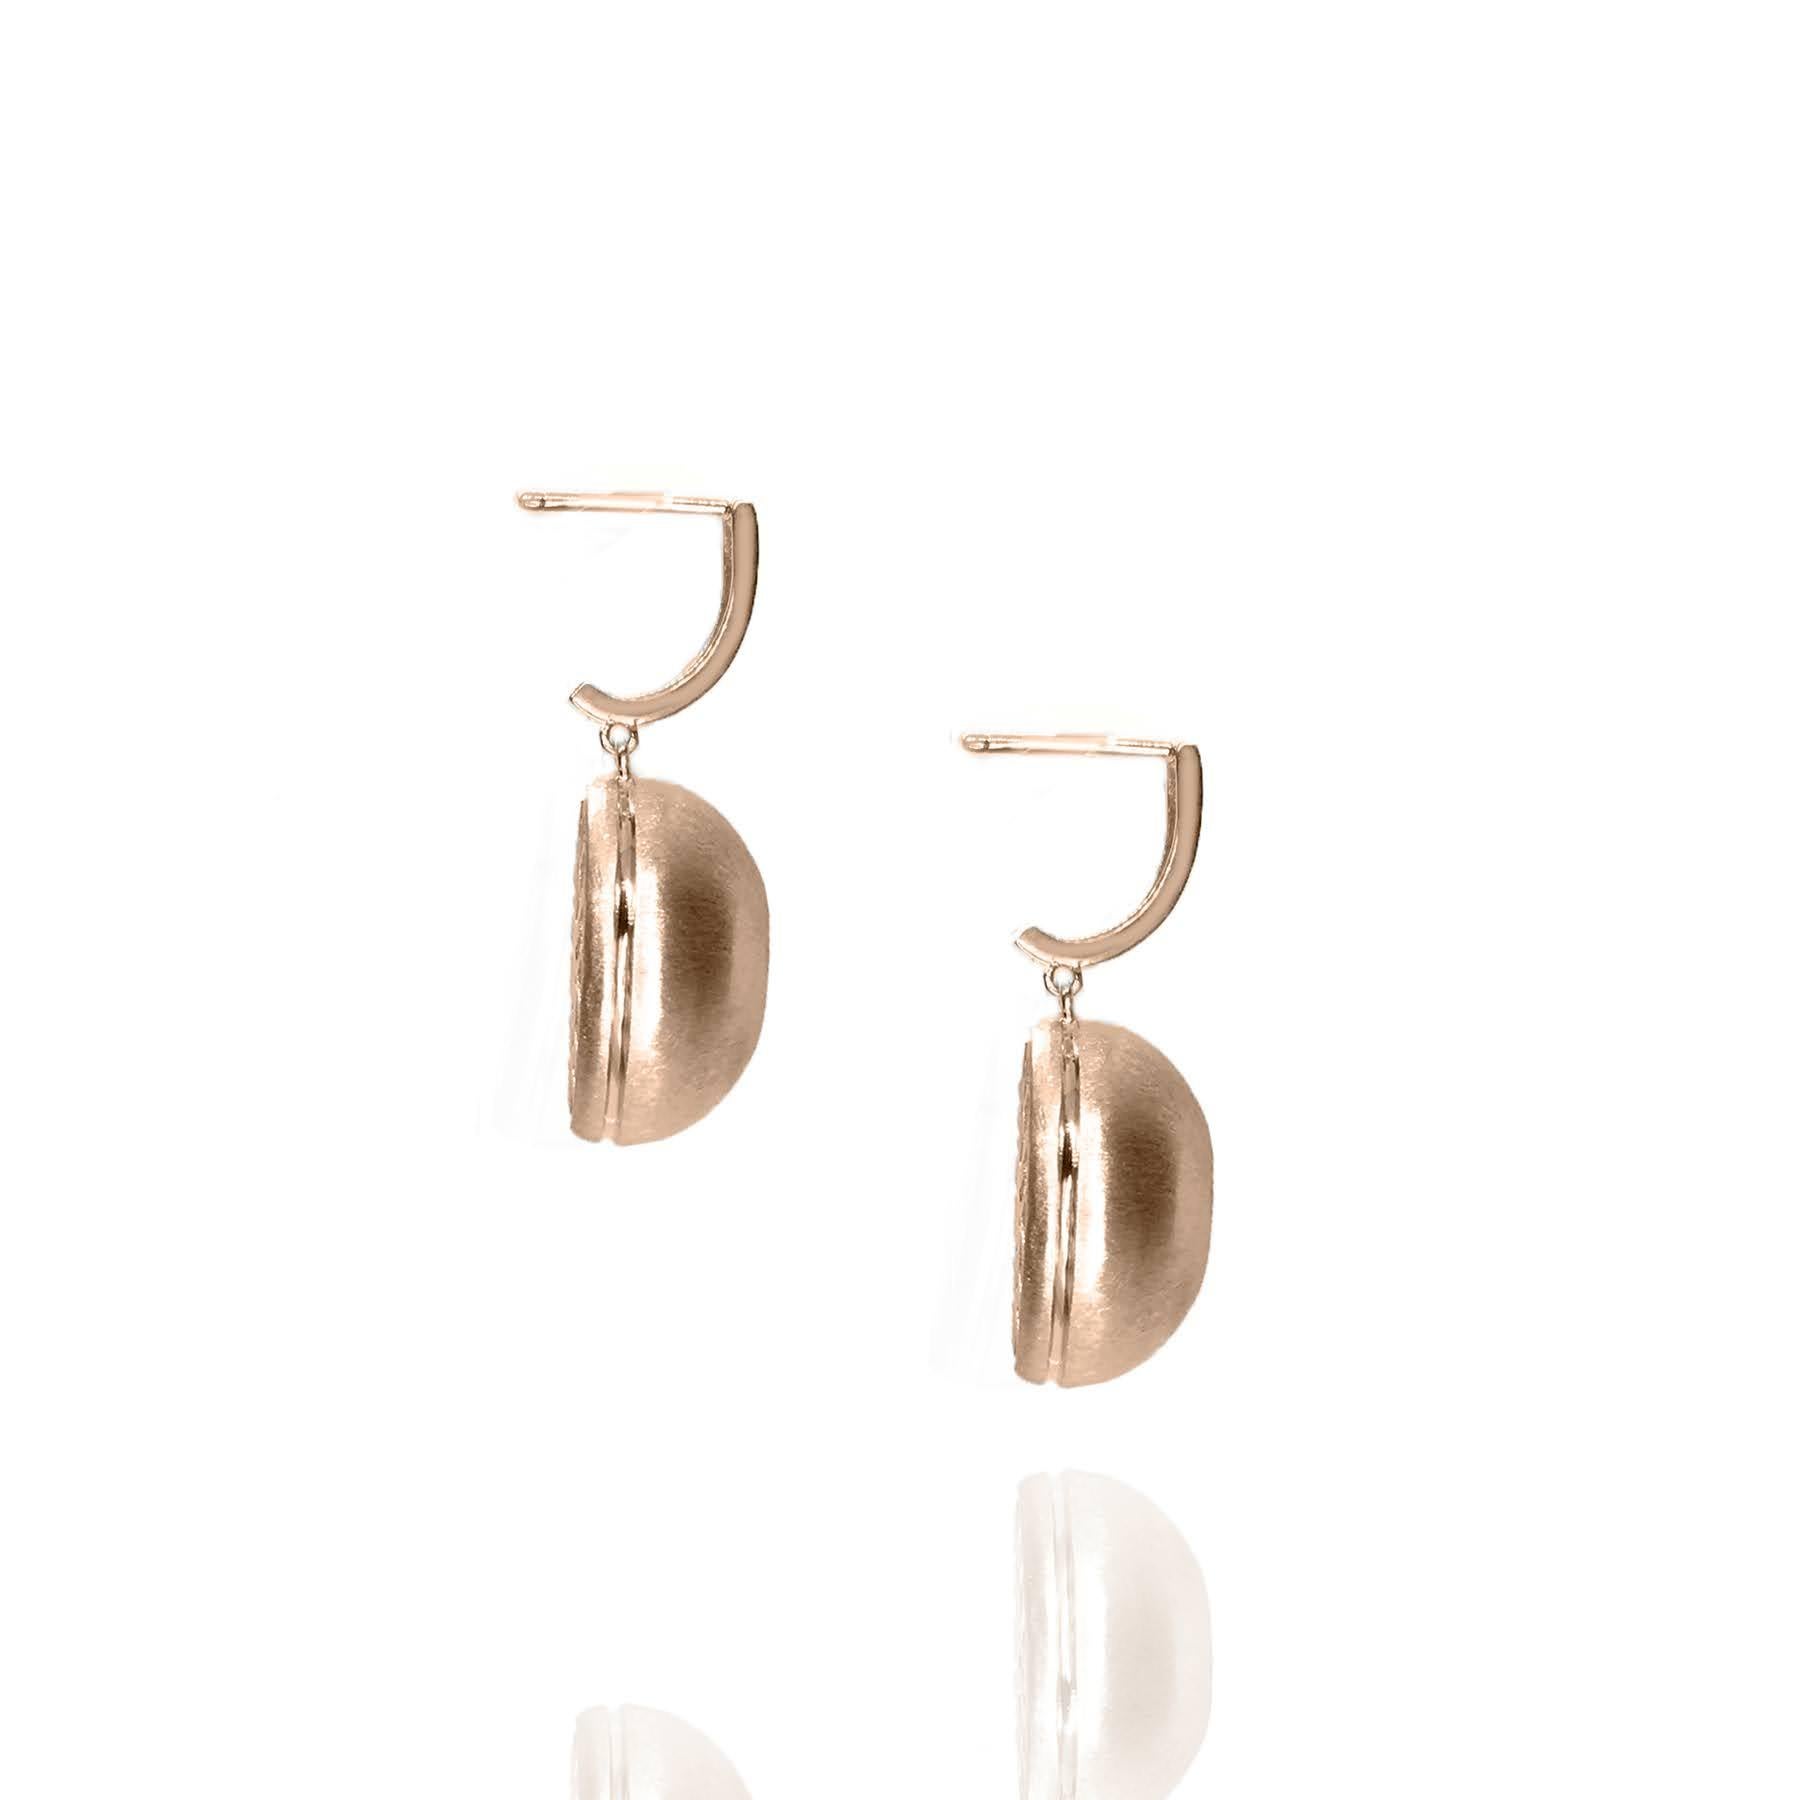 These White Sapphire in Rose Gold Dome Drop Earrings, part of our Power Series, are a symbolic design inspired by the idea of looking inward, the notion of what a person needs is already inside of them. The clean and classic lines are imaginative,